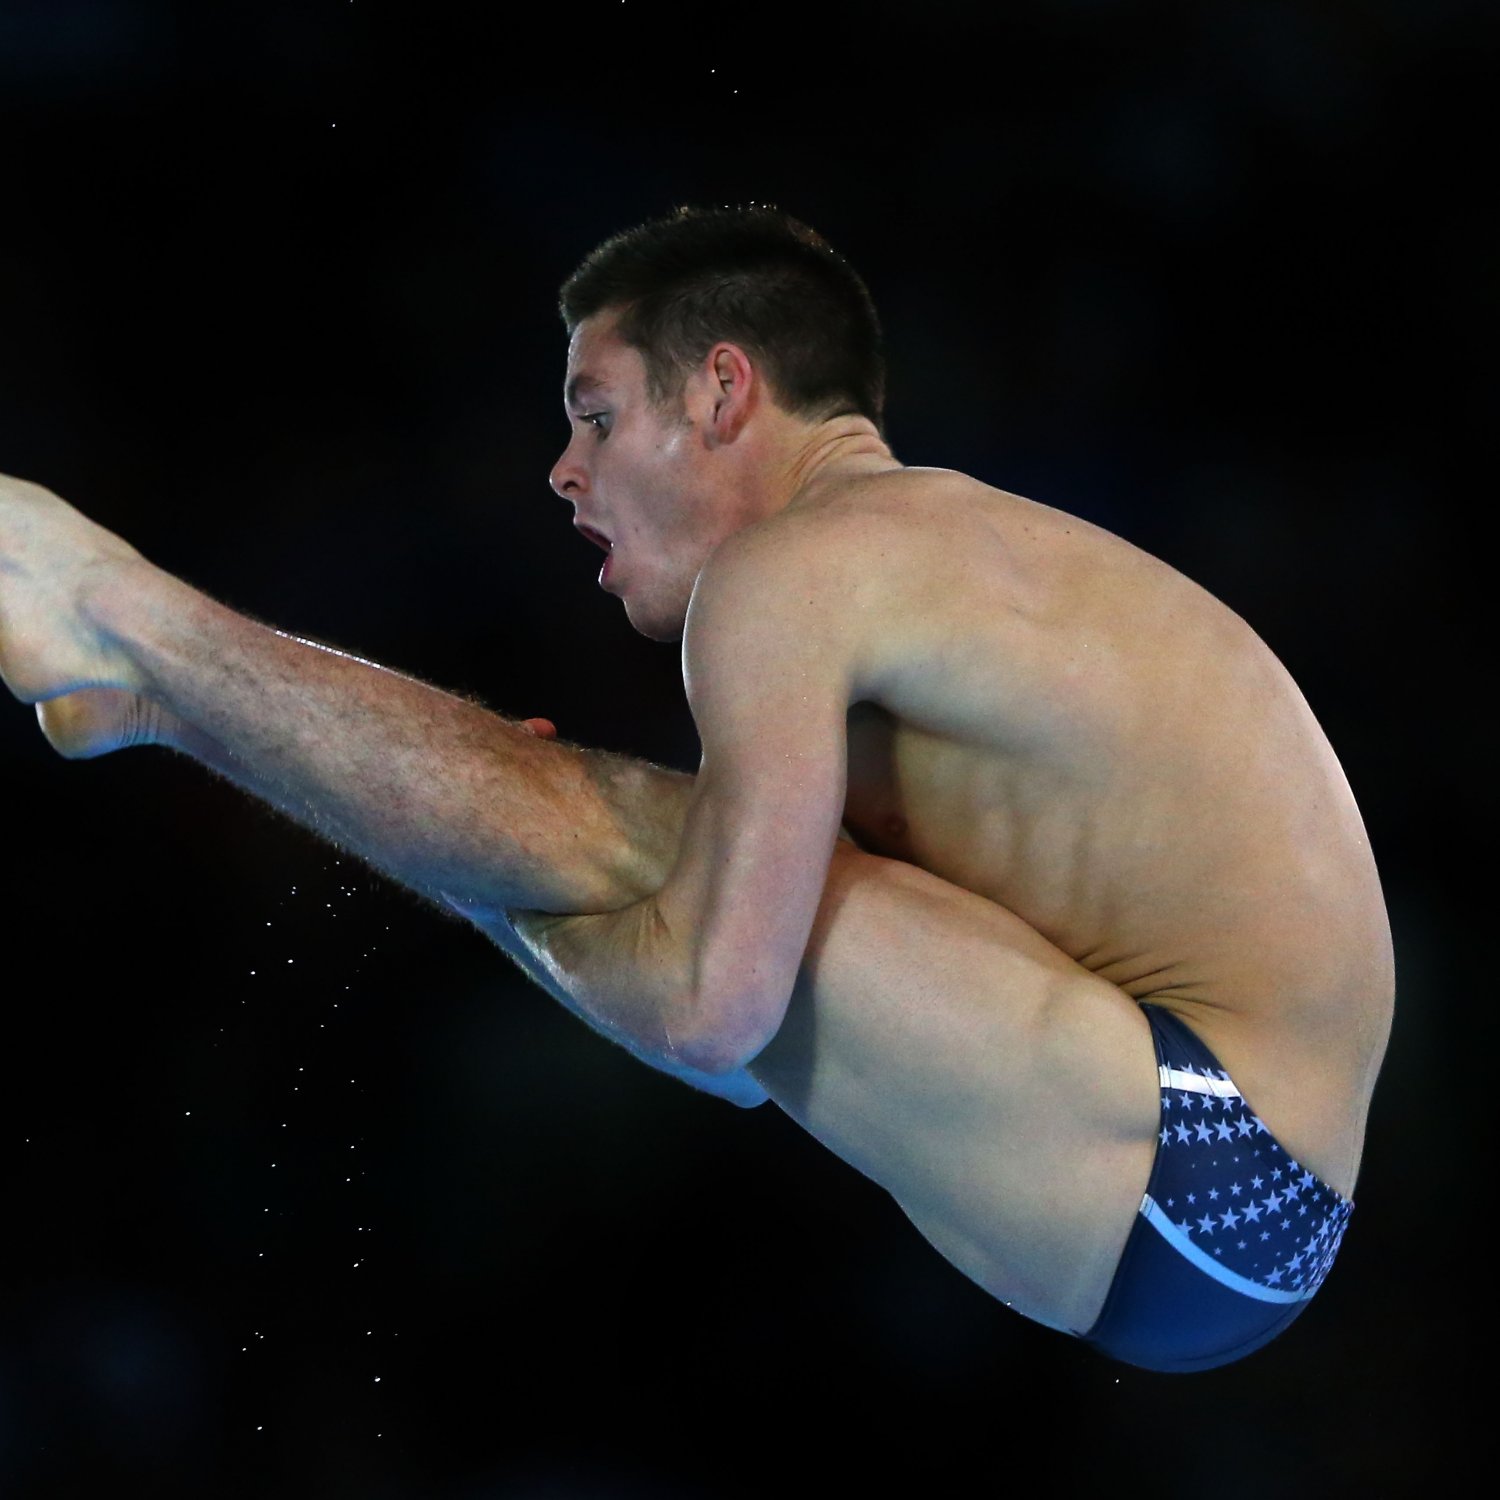 Olympic Diving 2012 Men's 10Meter Platform Results and Analysis